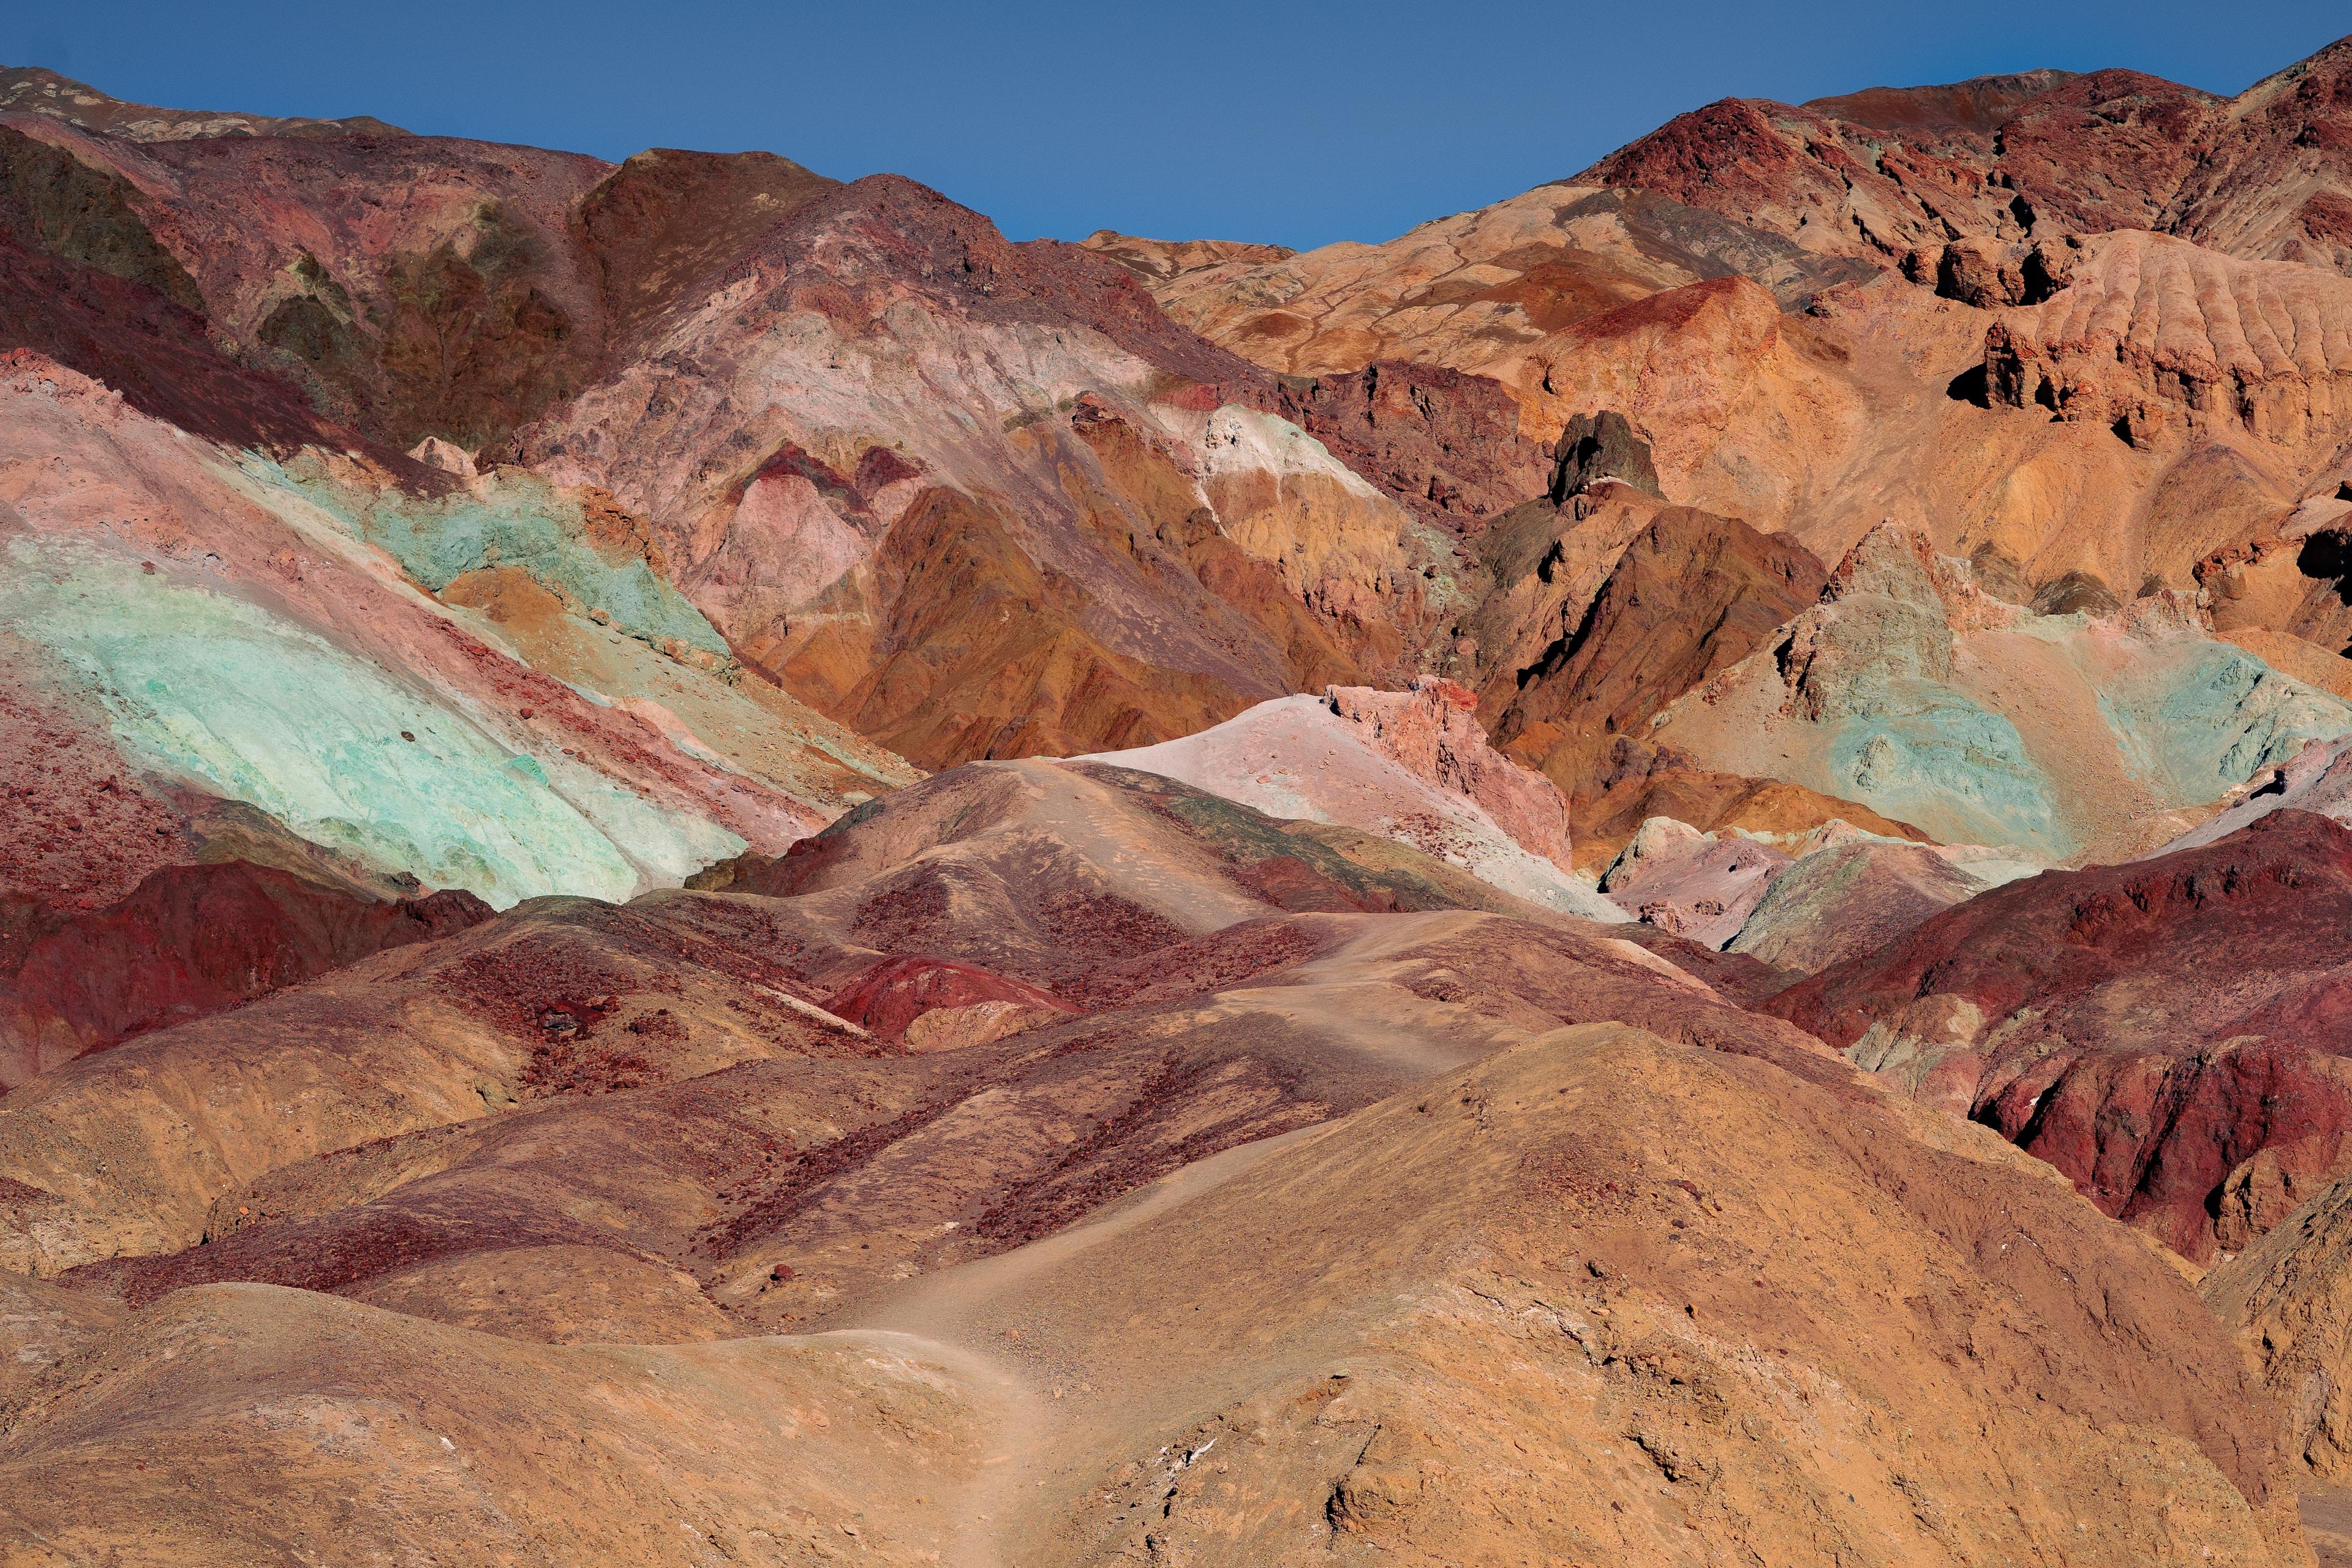 View of the colorful peaks in Death Valley National Park.